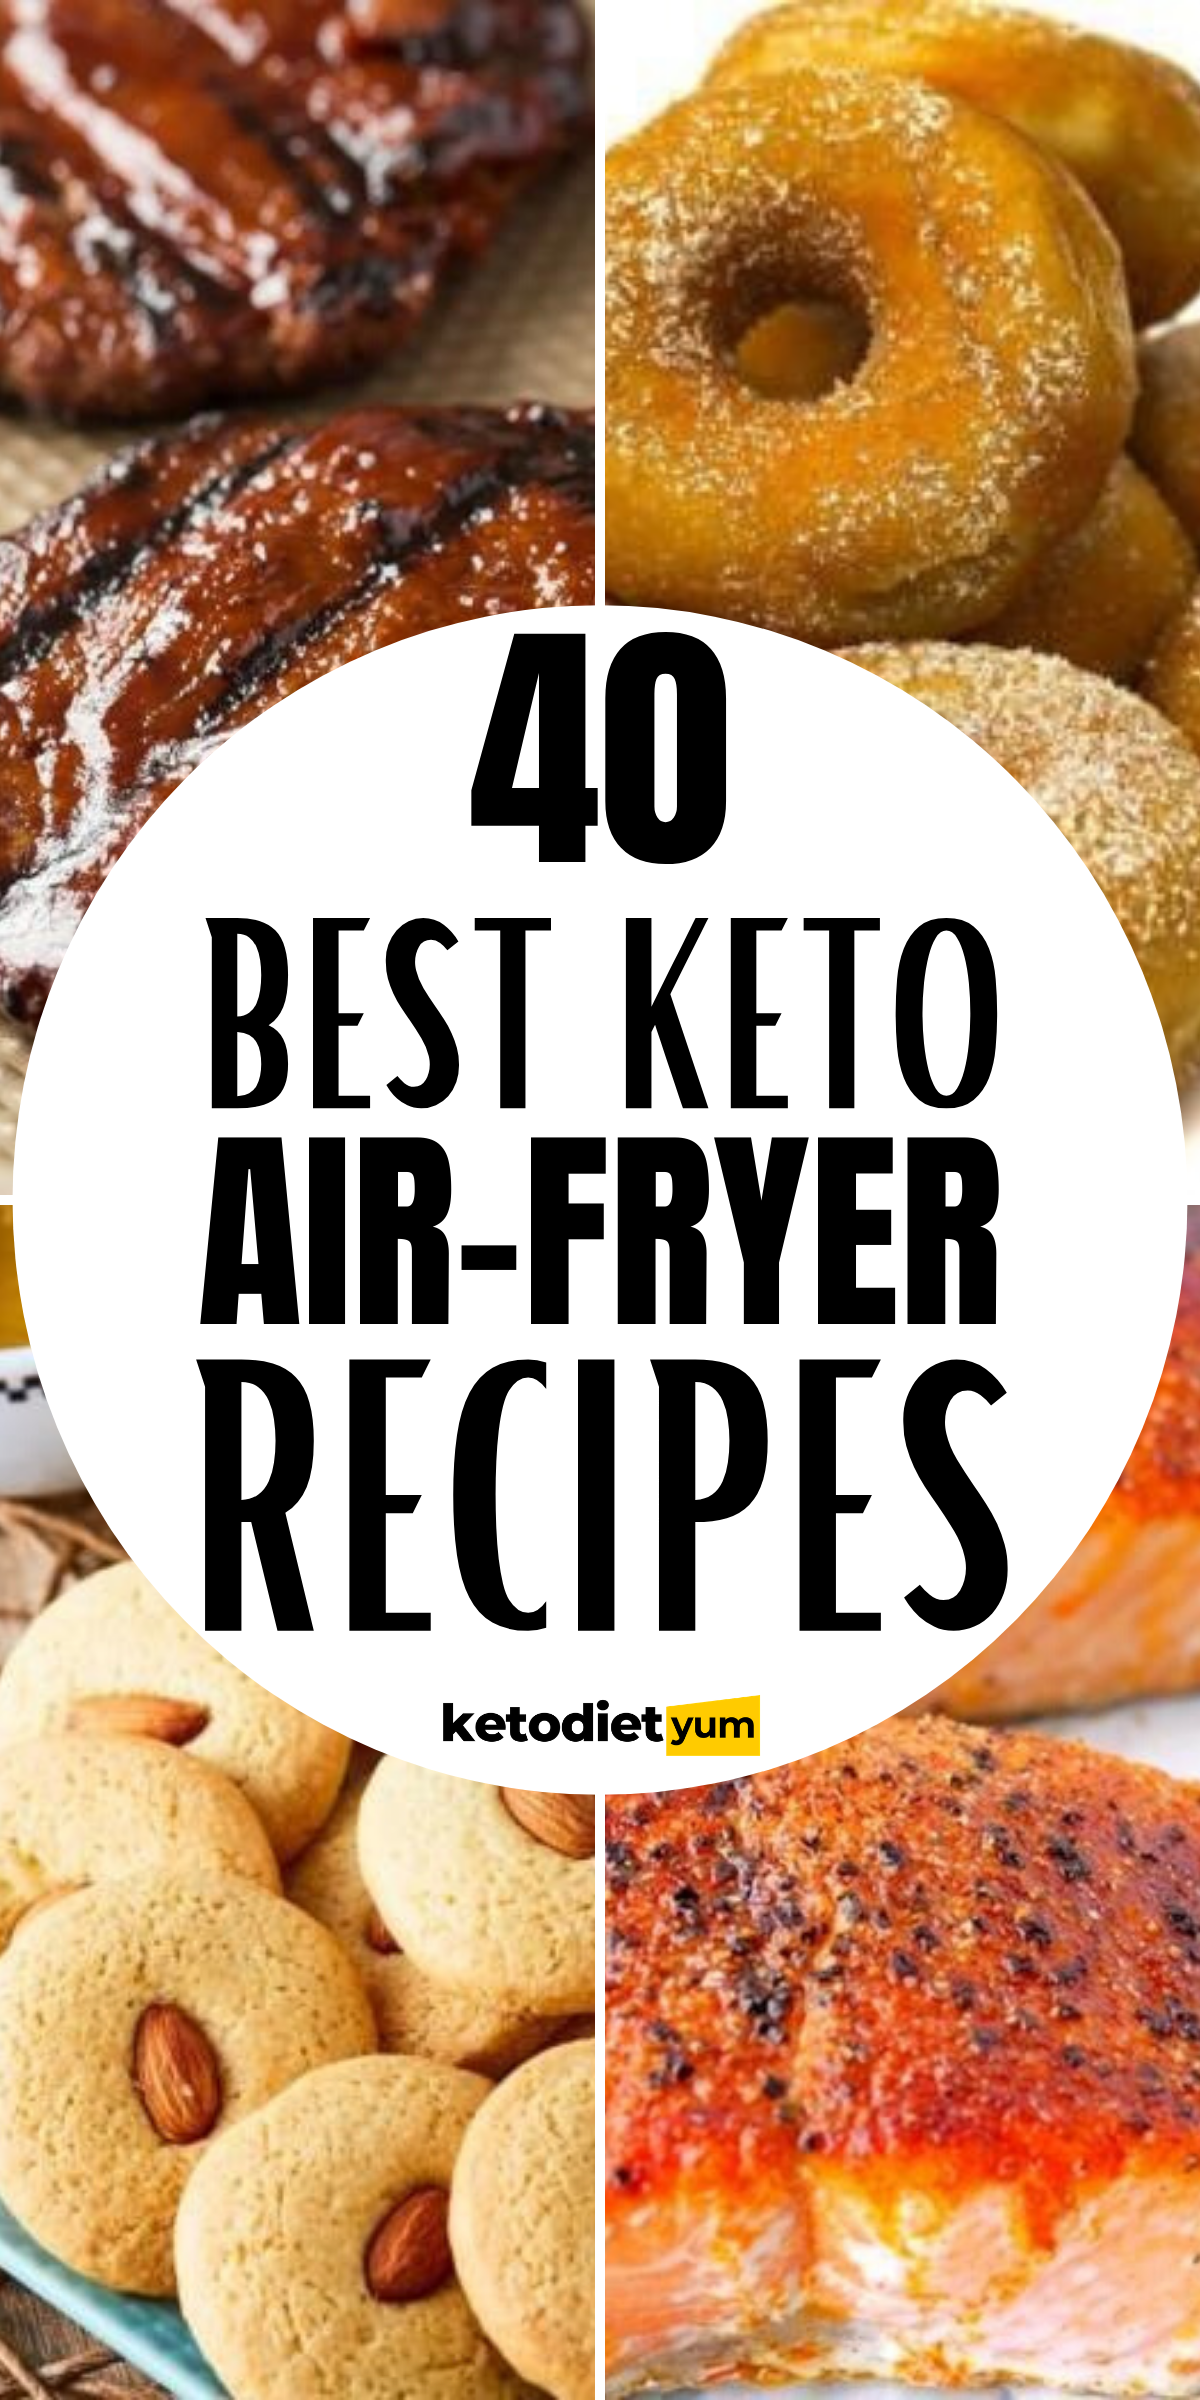 40 Best Keto Air Fryer Recipes to Lose Weight -   19 air fryer recipes healthy low calorie ideas